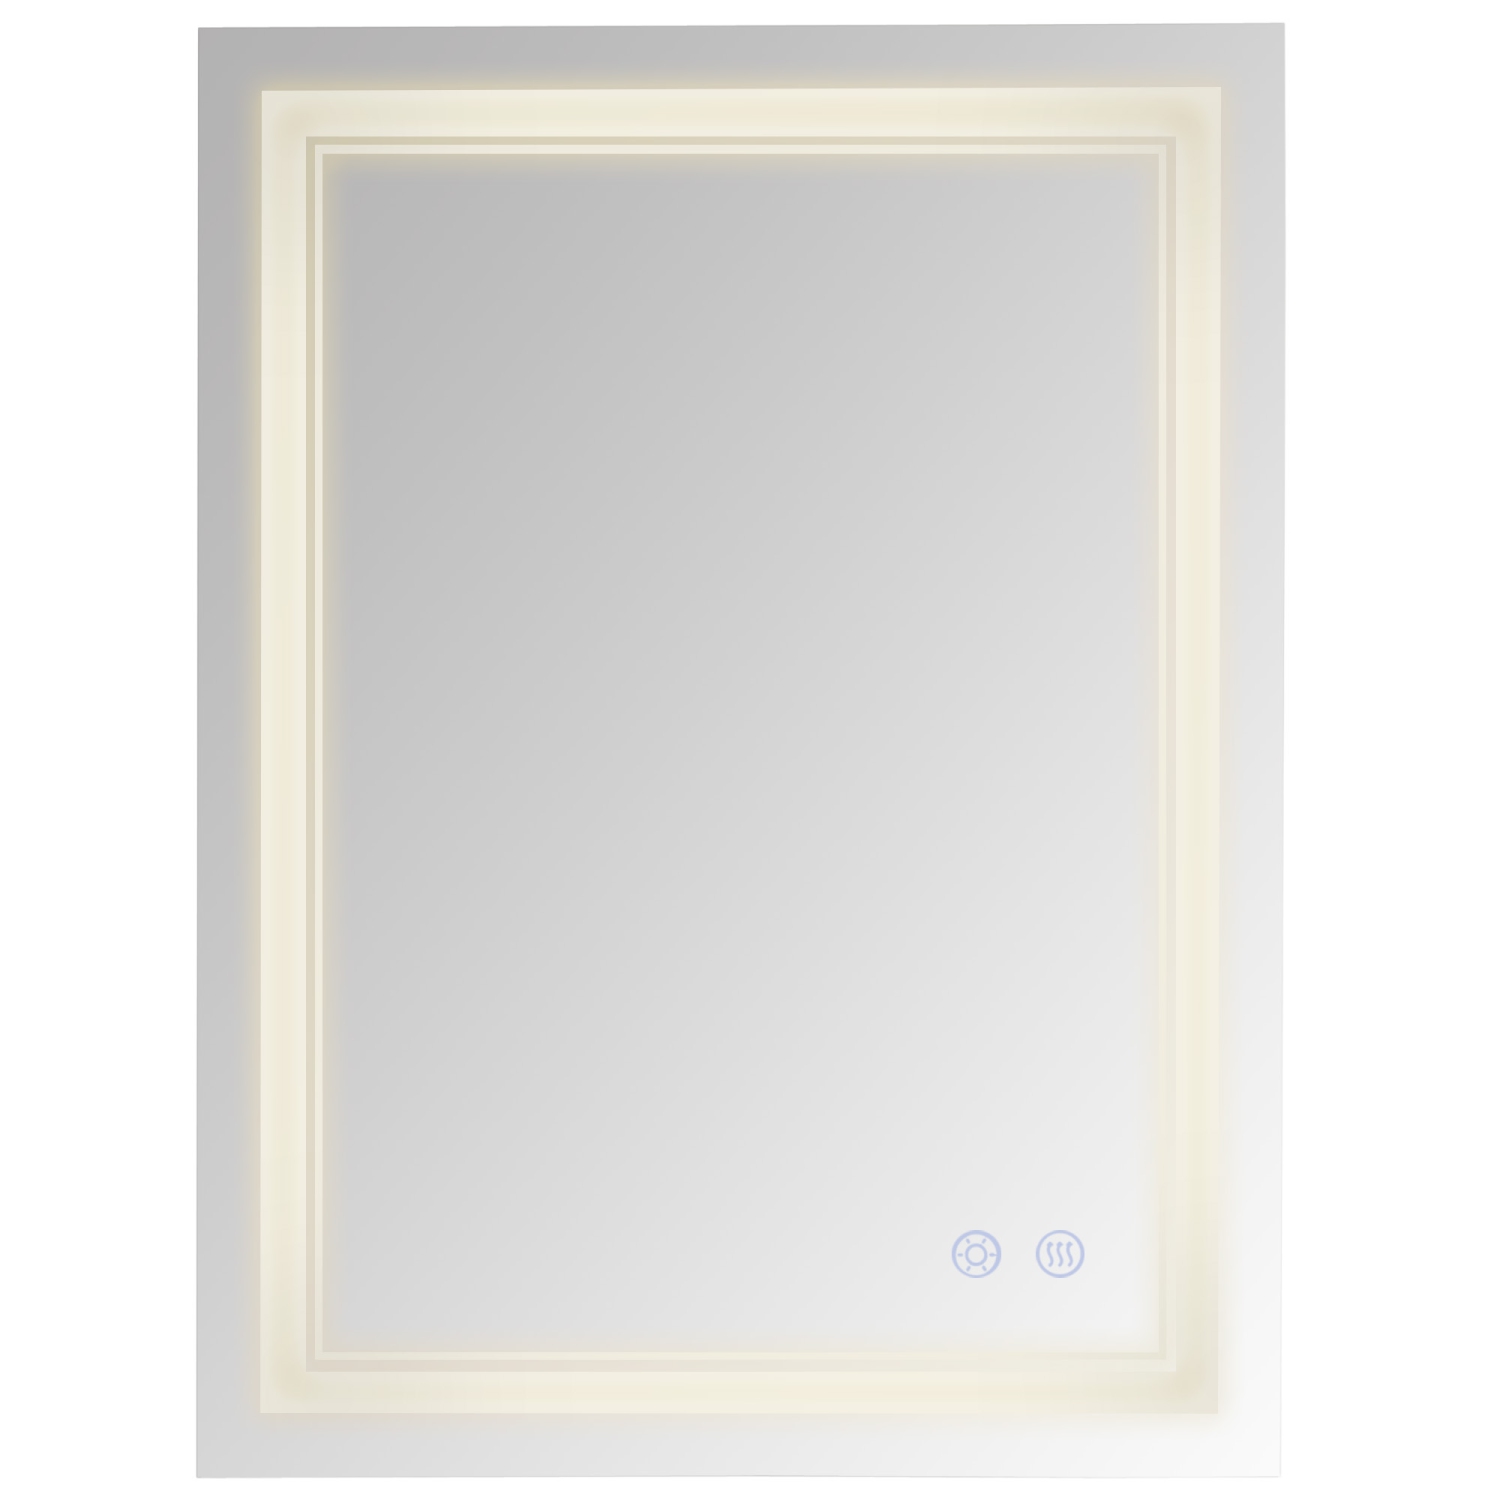 kleankin 24'' x 32'' LED Bathroom Mirror, Dimmable Lighted Anti Fog Wall-Mounted Mirror, with 3 Color, Smart Touch, Plug-in, Vertical or Horizontal Hanging